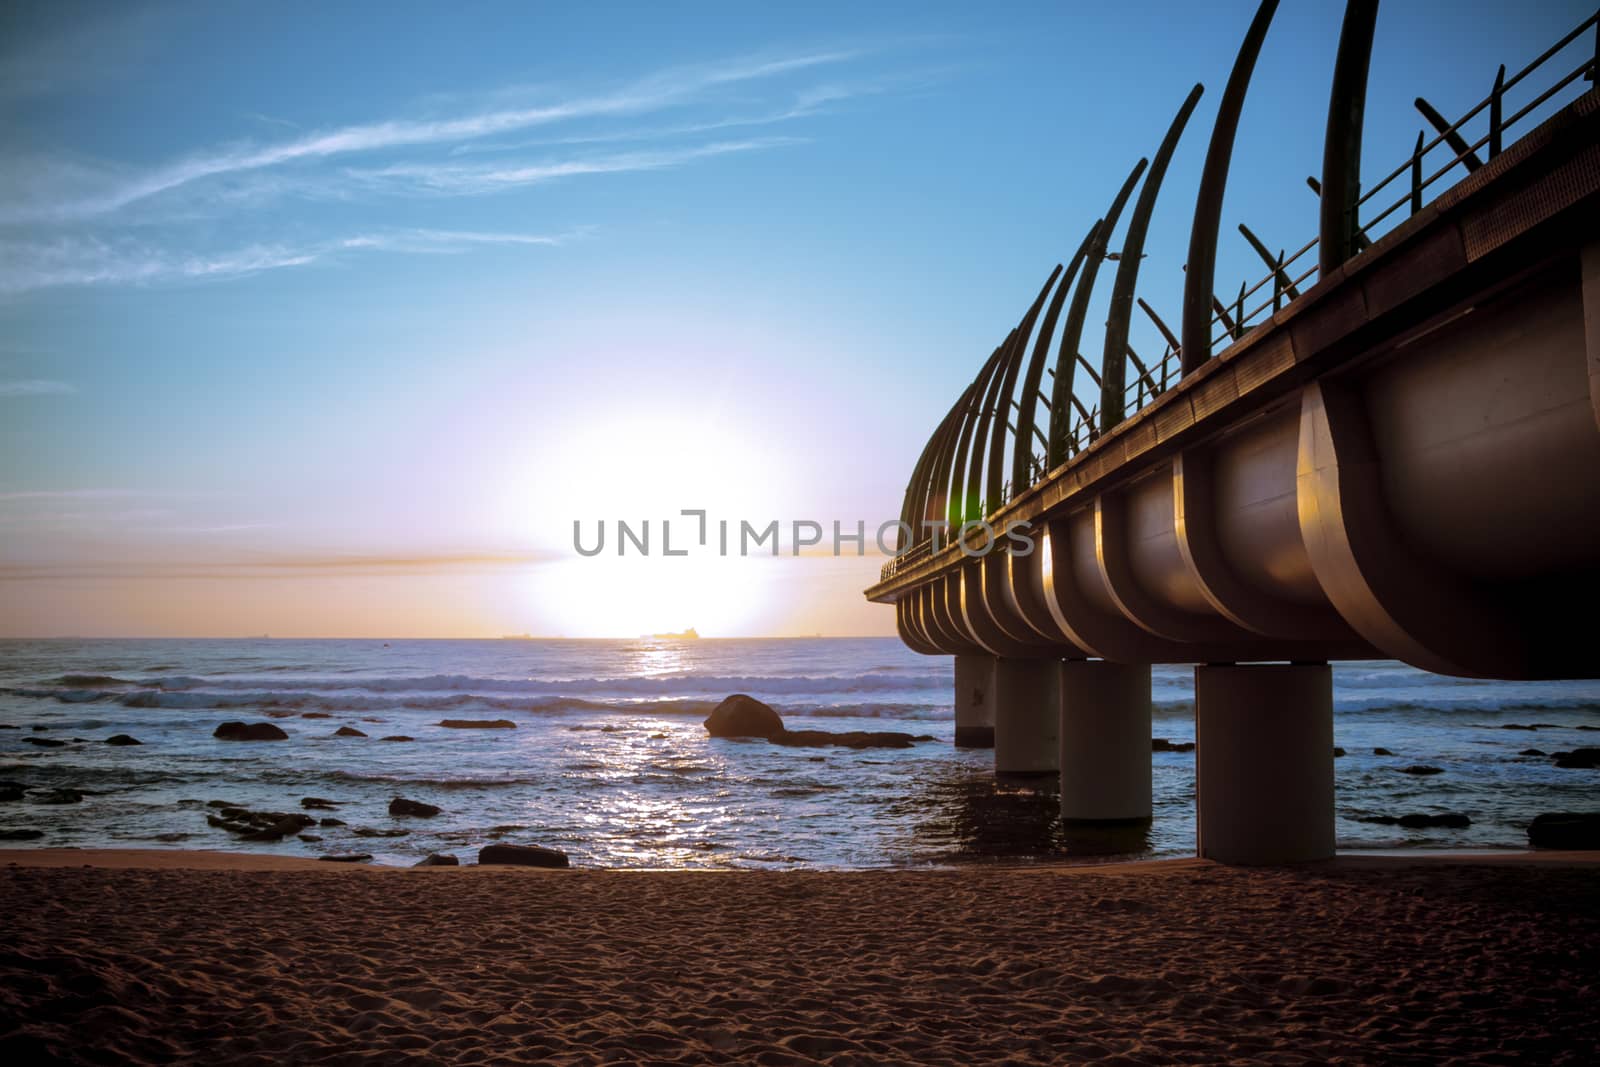 Umhlanga Pier in Durban South Africa in Sunset by stockbp